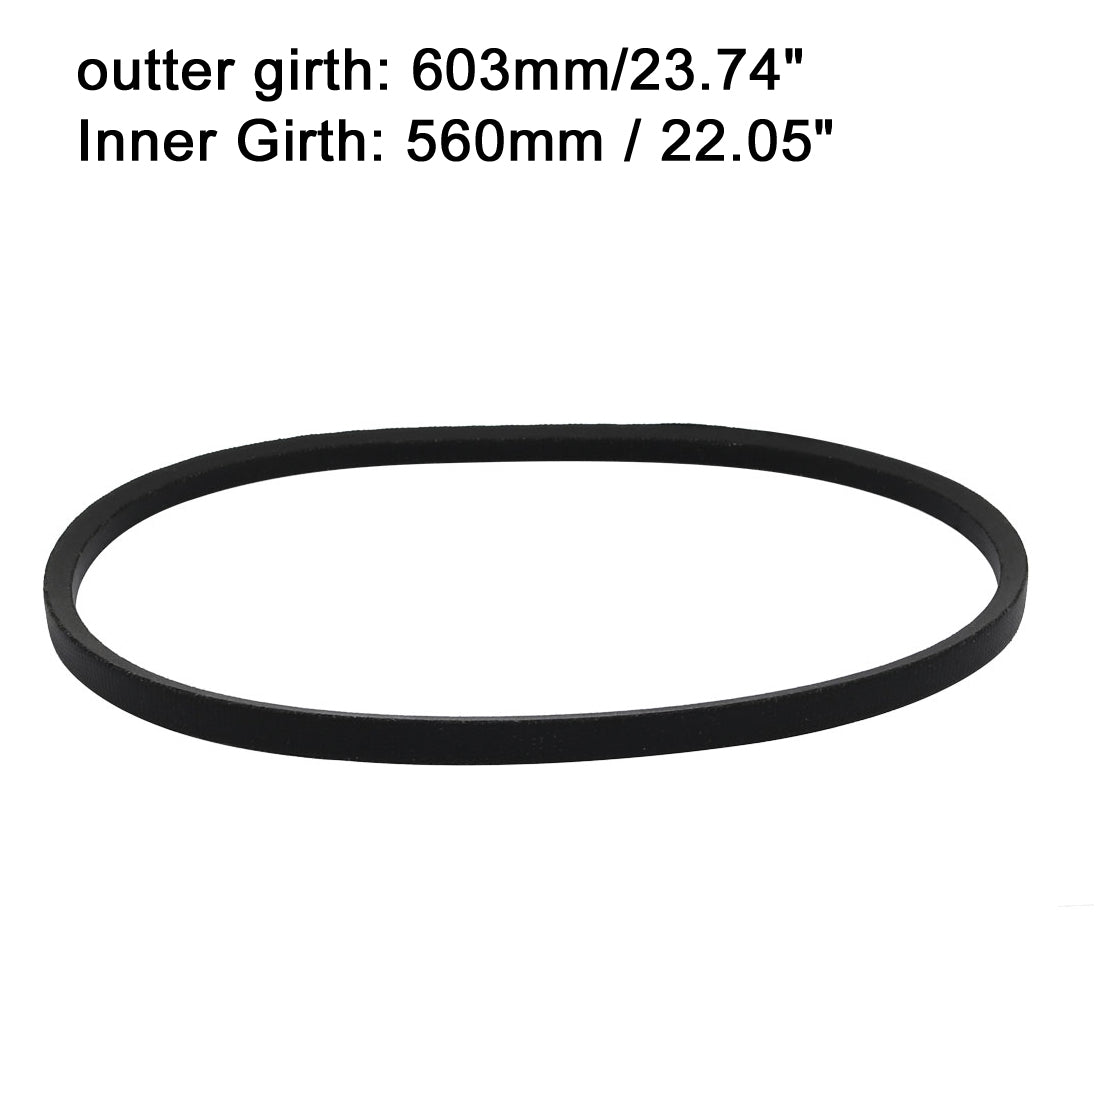 uxcell Uxcell O-560 Rubber Transmission Drive Belt V-Belt 10mm Wide 6mm Thick for Washing Machine